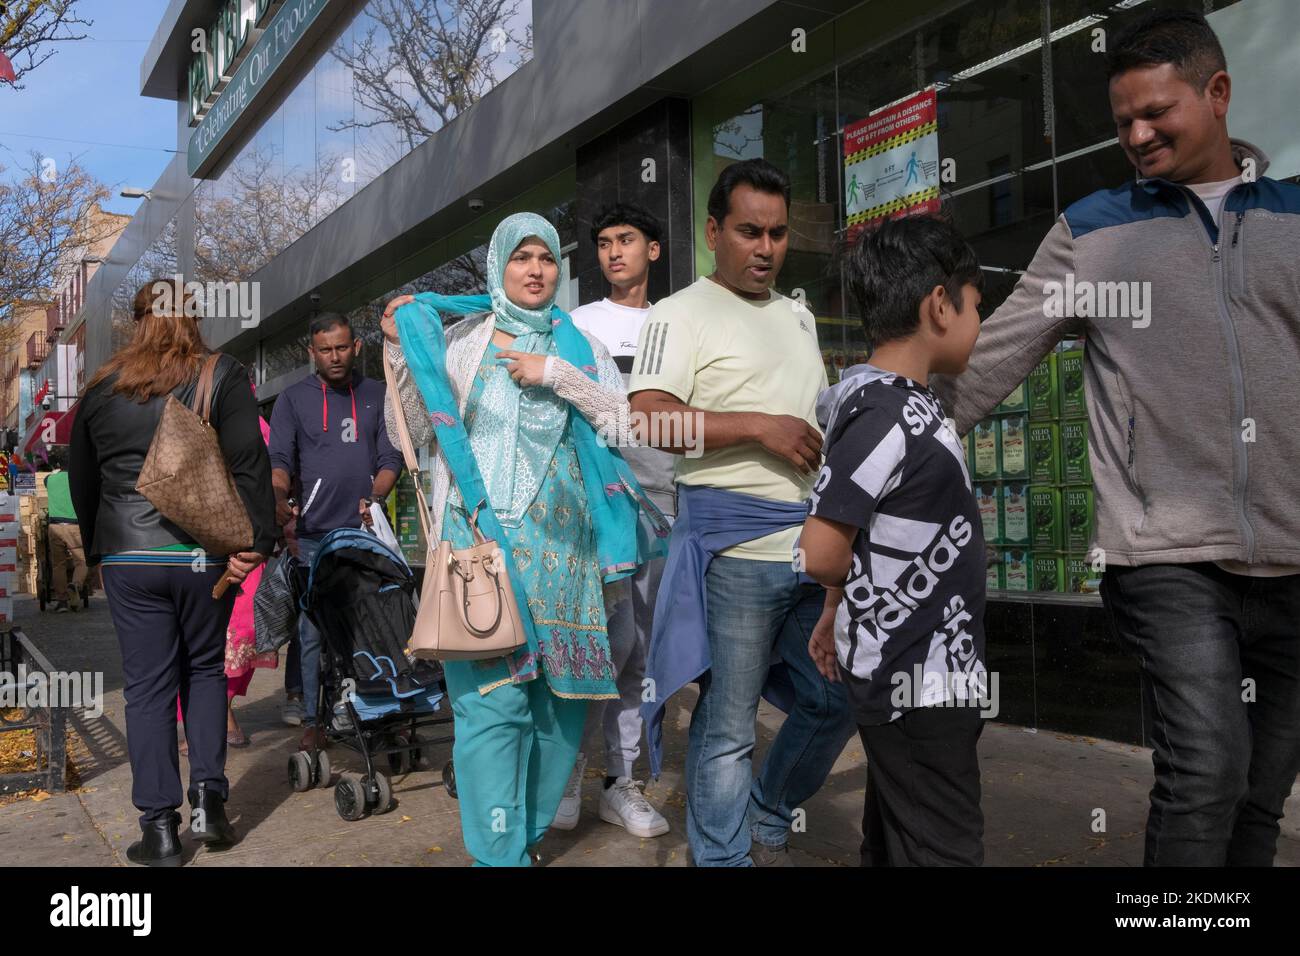 A street scene in Jackson Heights with a variety of ages, ethnicities and attire. On 74th Street in Queens, New York. Stock Photo